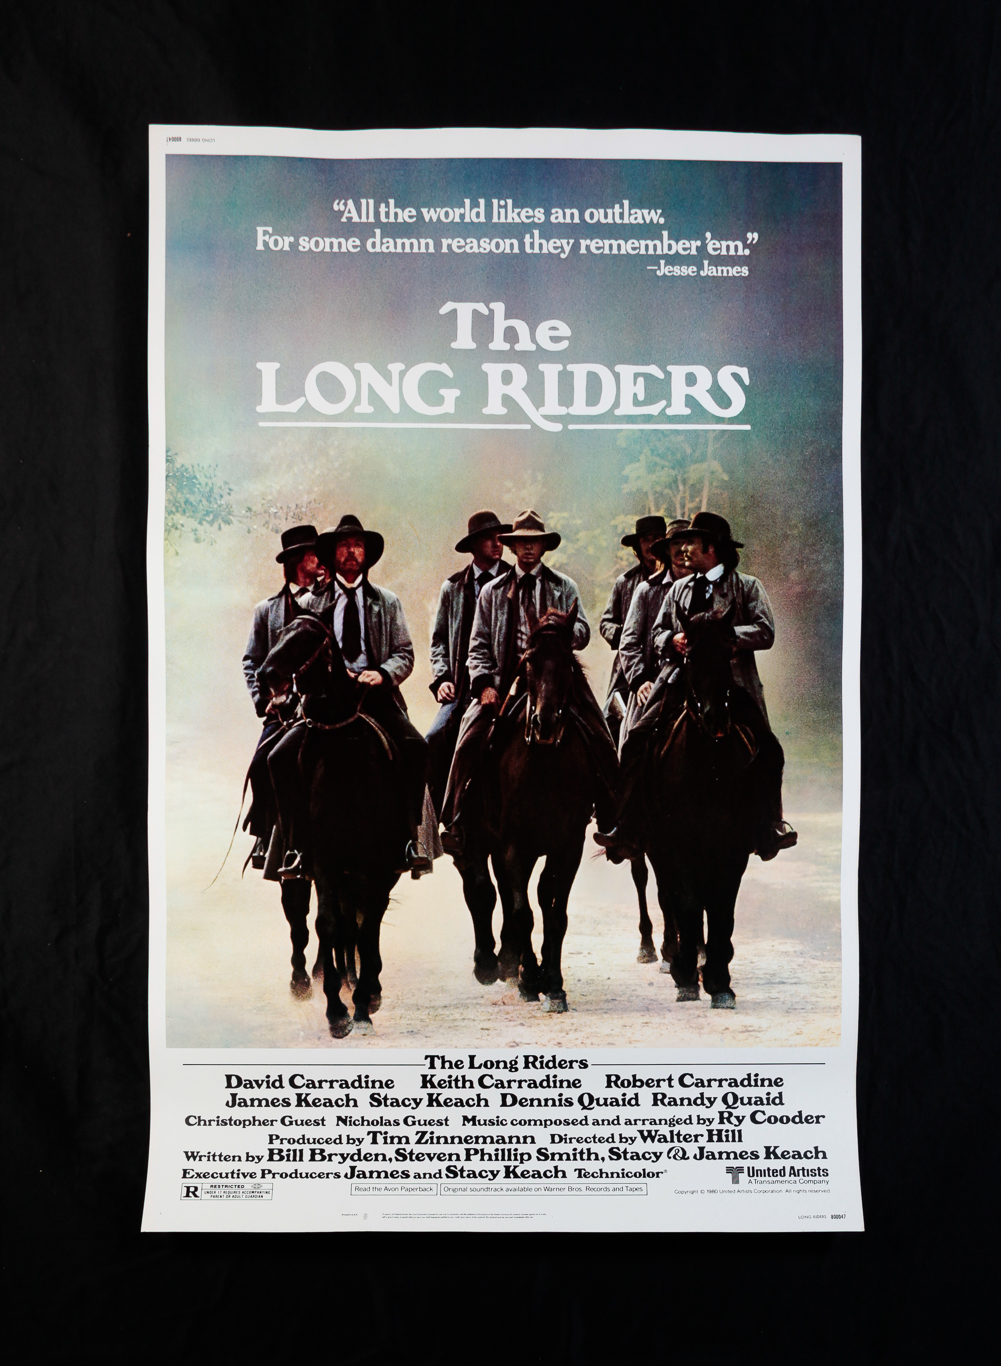 THE LONG RIDERS (UNITED ARTISTS, 1980).